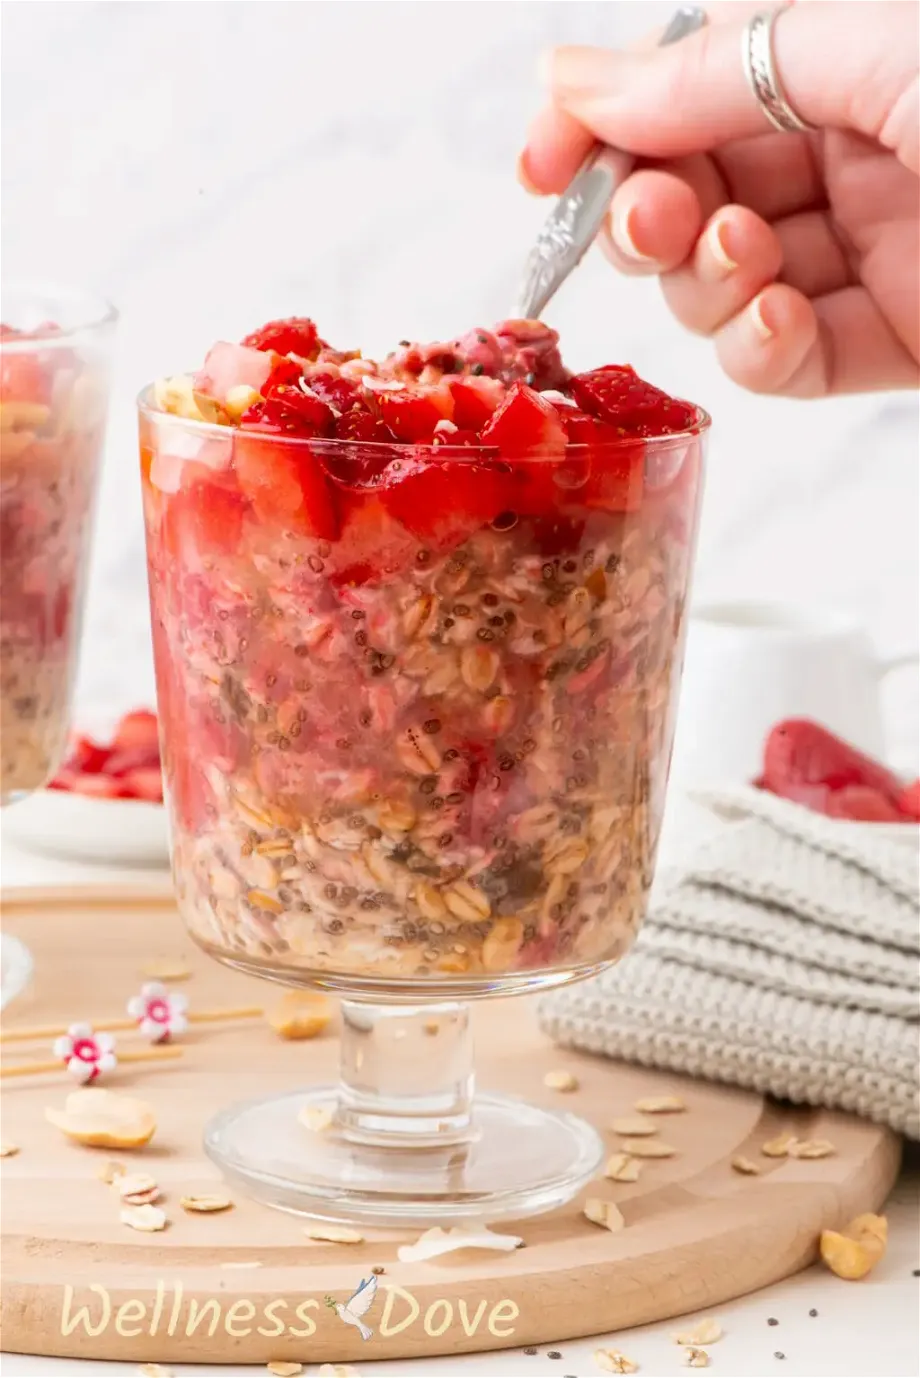 the Easy Overnight Oats with Strawberries, a front view while a hand is taking some of the oats with a spoon 